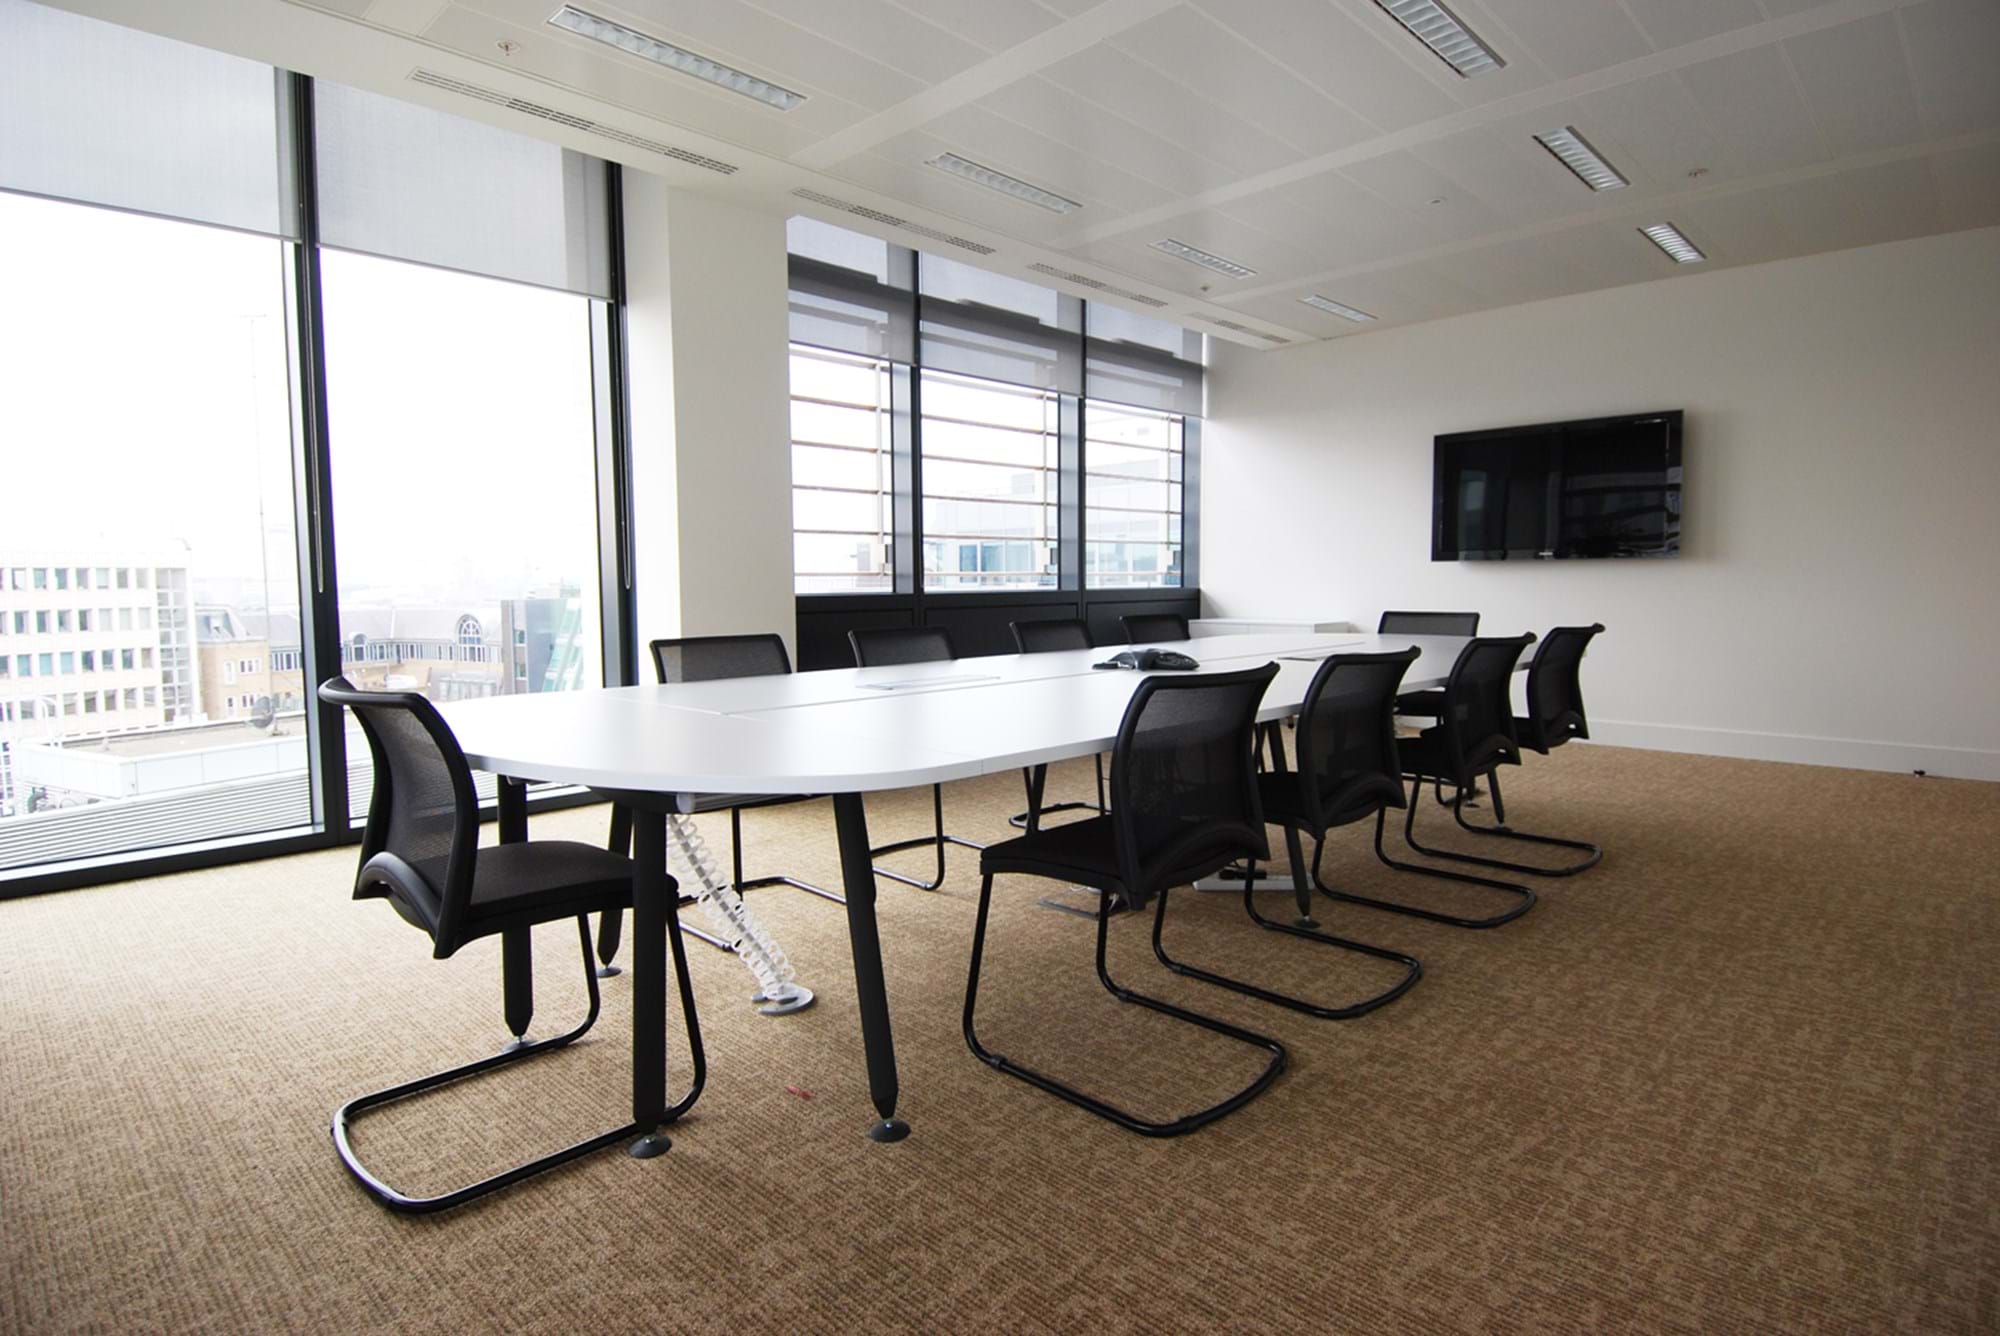 Modus Workspace office design, fit out and refurbishment - Carbon Trust - Meeting Room - Meeting Room_Office Fit Out.jpg